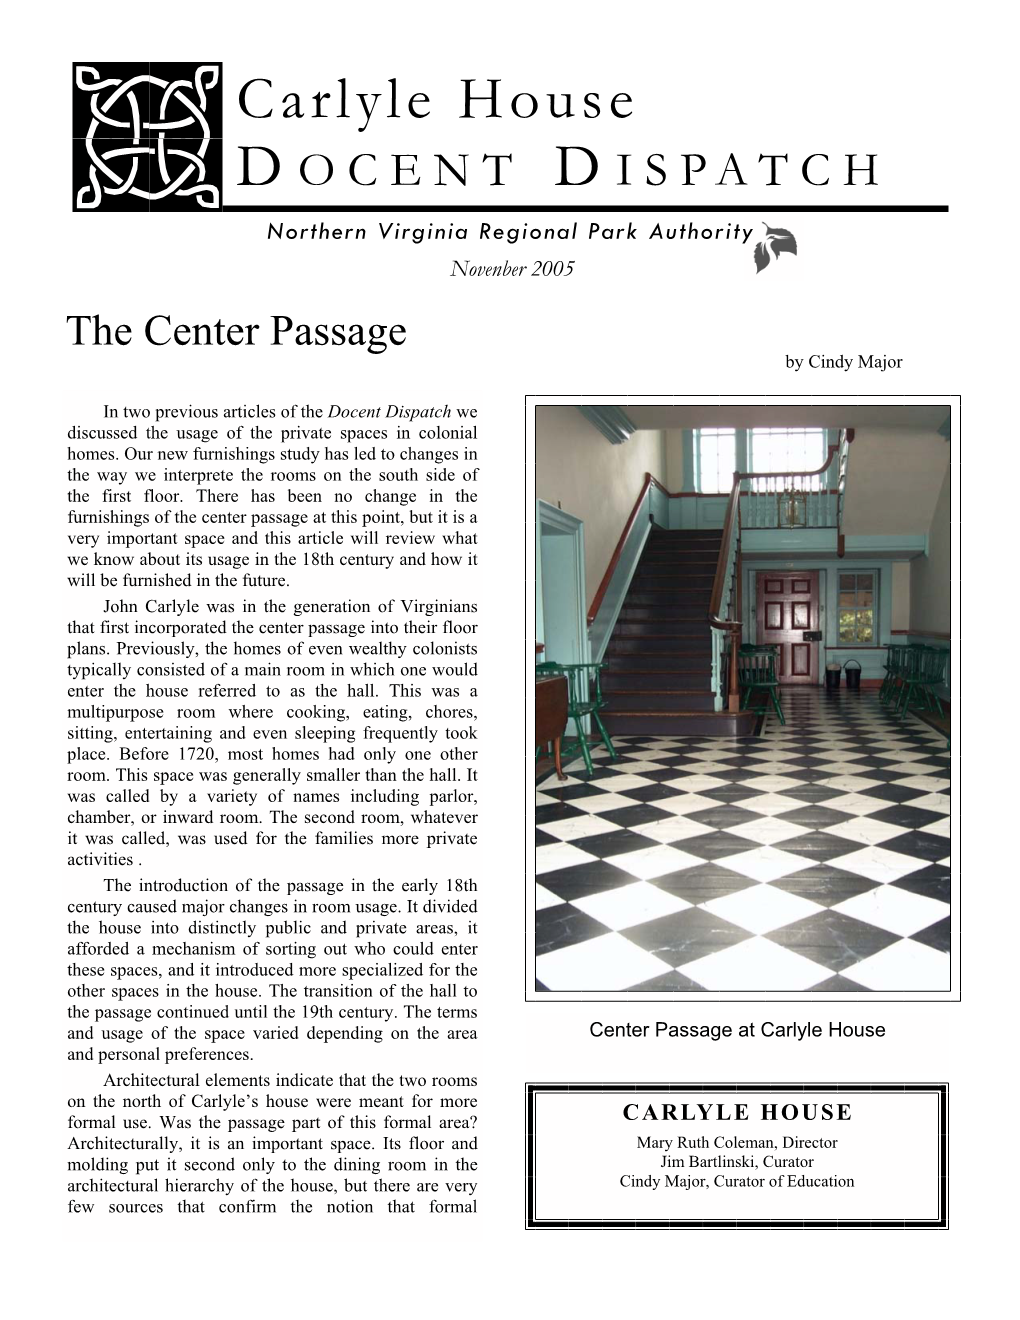 The Center Passage by Cindy Major